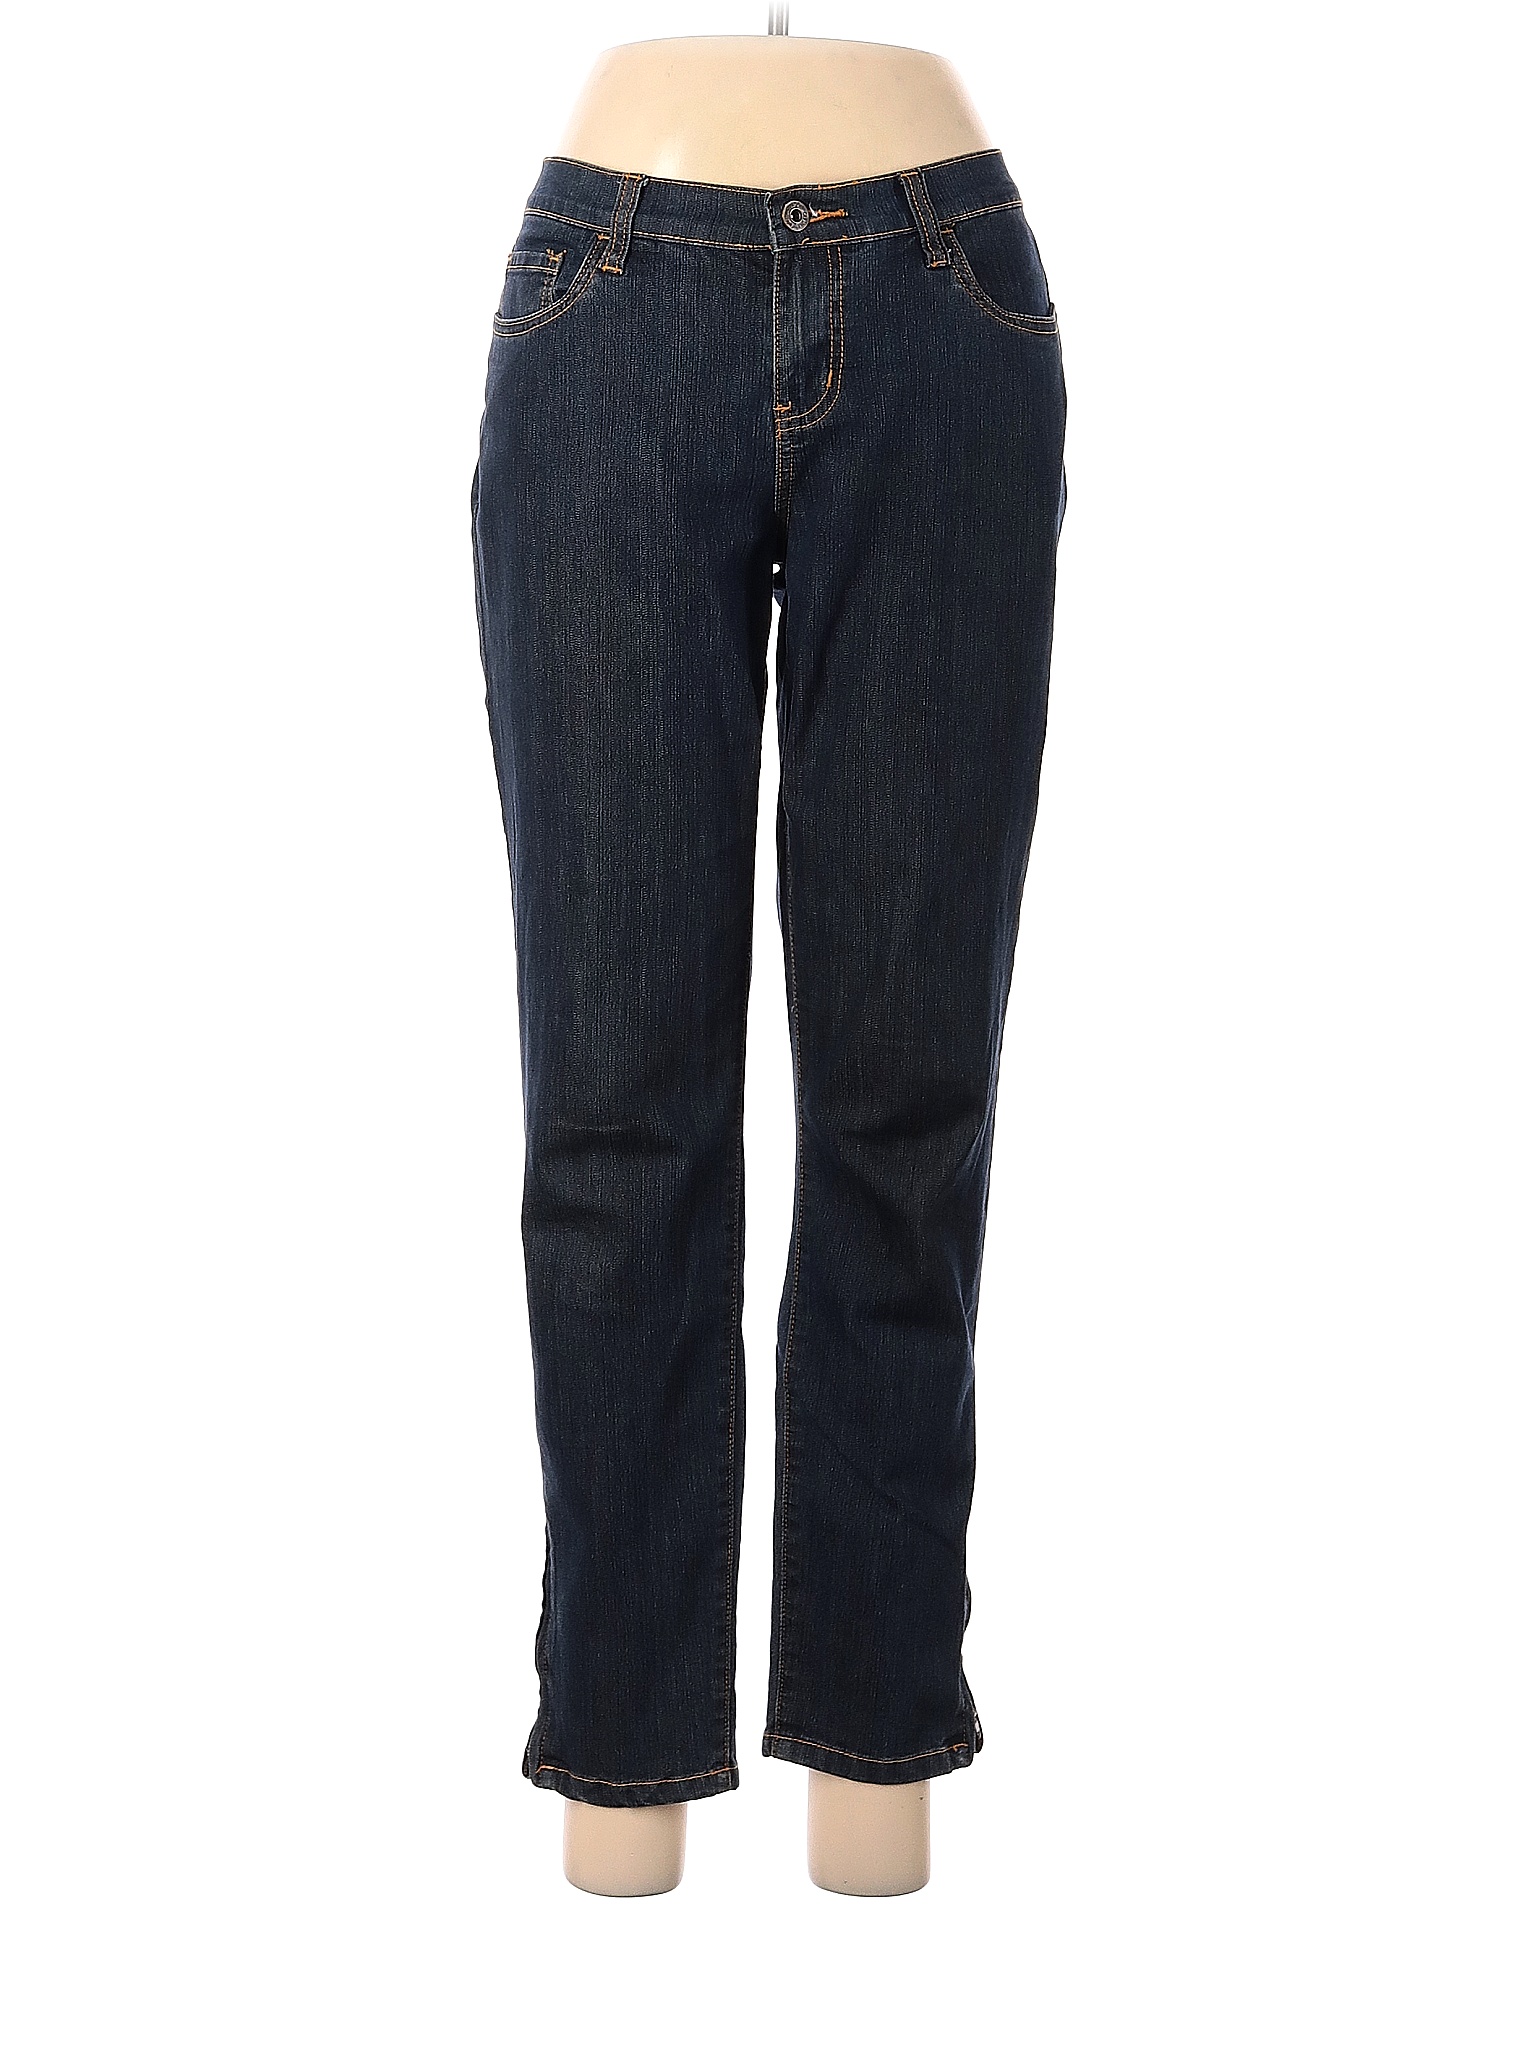 Metrostyle Solid Blue Jeans Size 8 - 81% off | thredUP